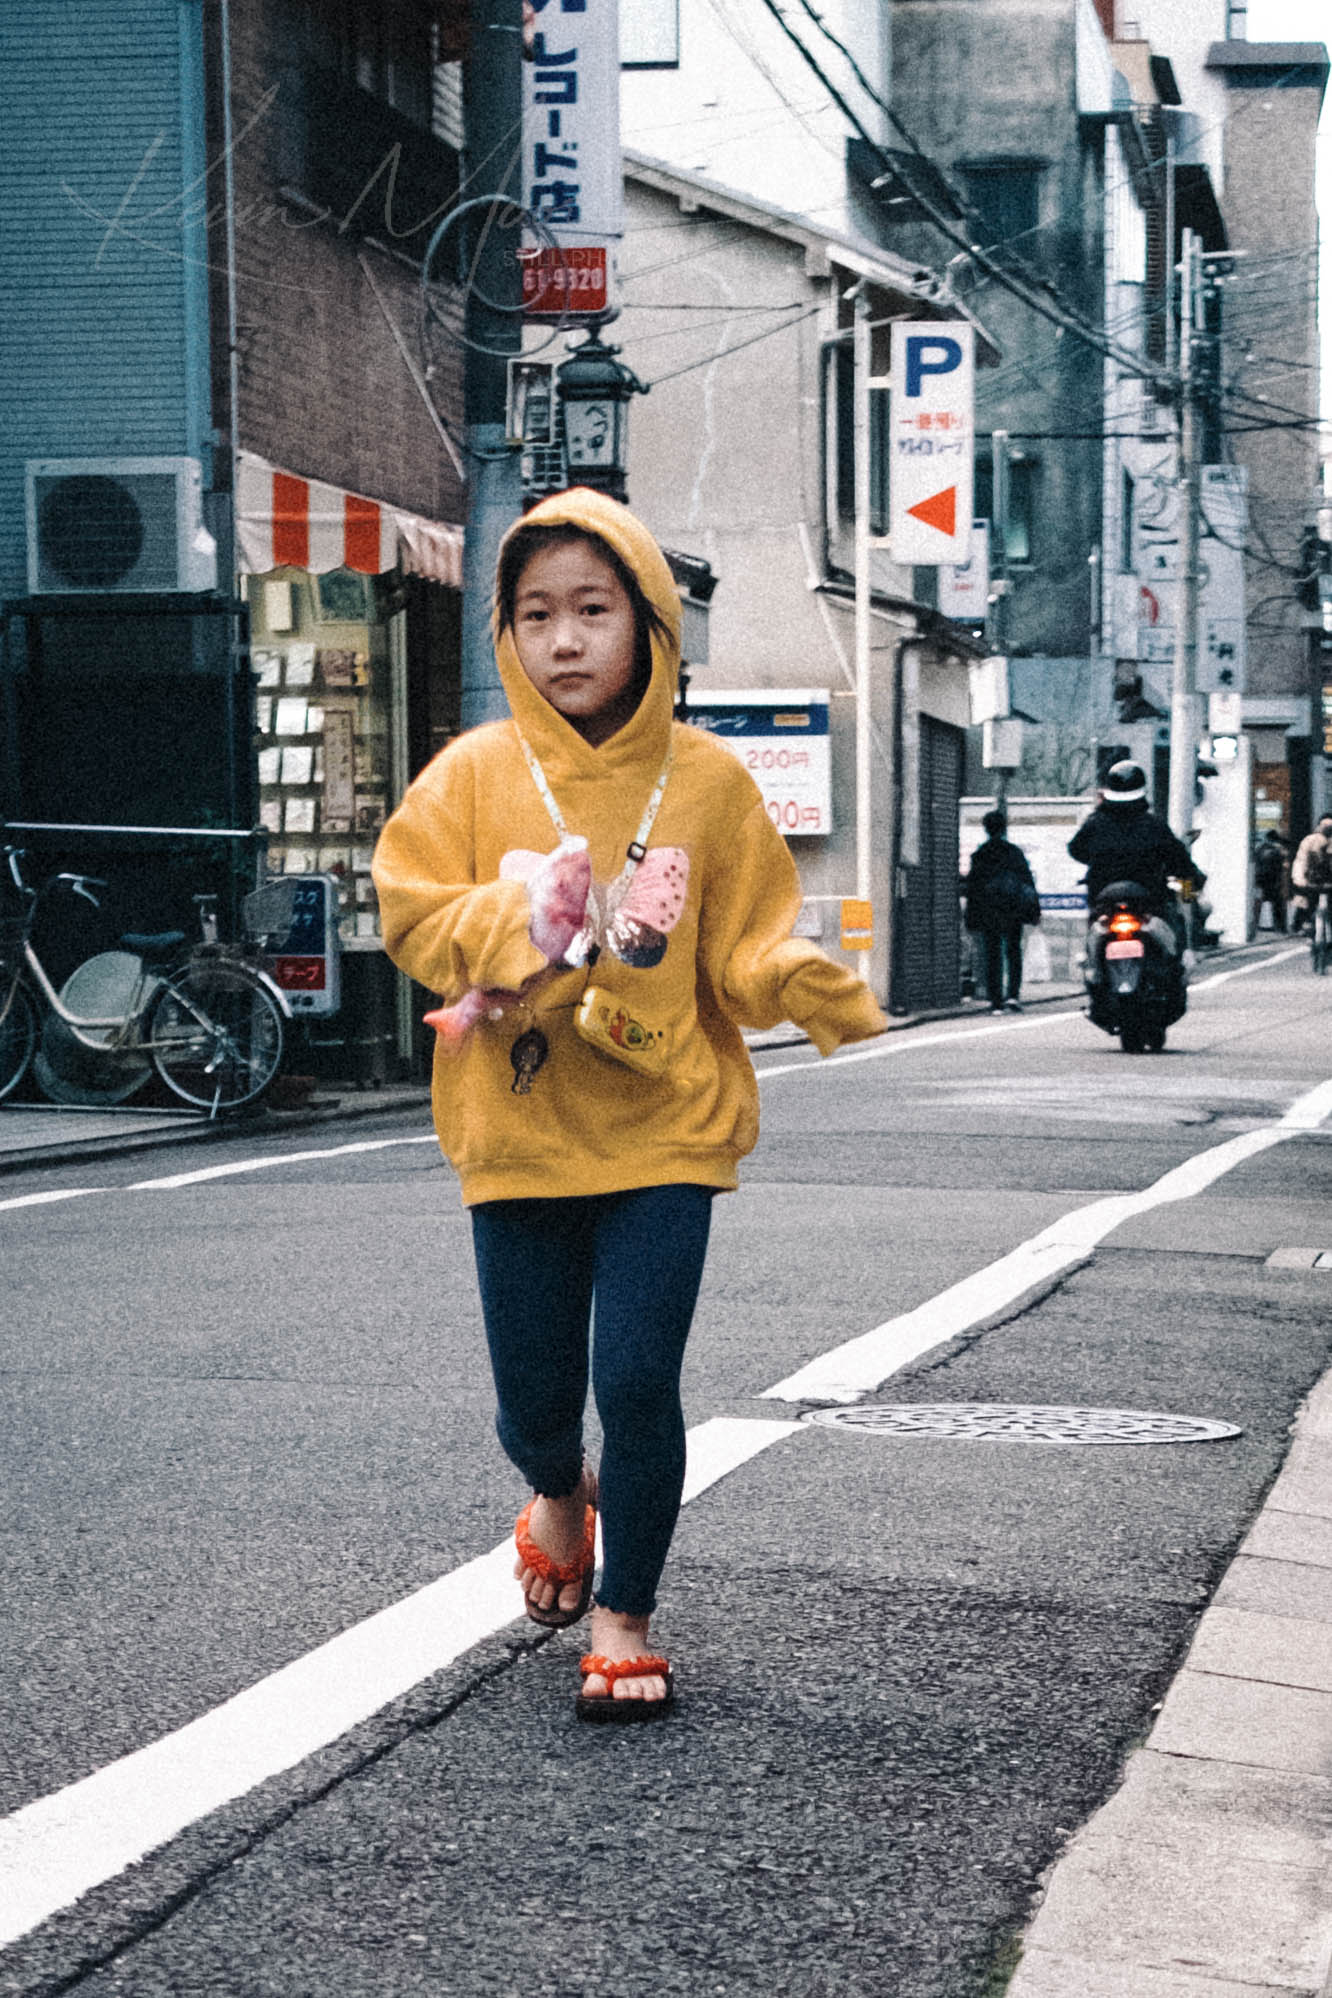 Youth in yellow hoodie strolling on busy Japanese city street with pink items in bag.